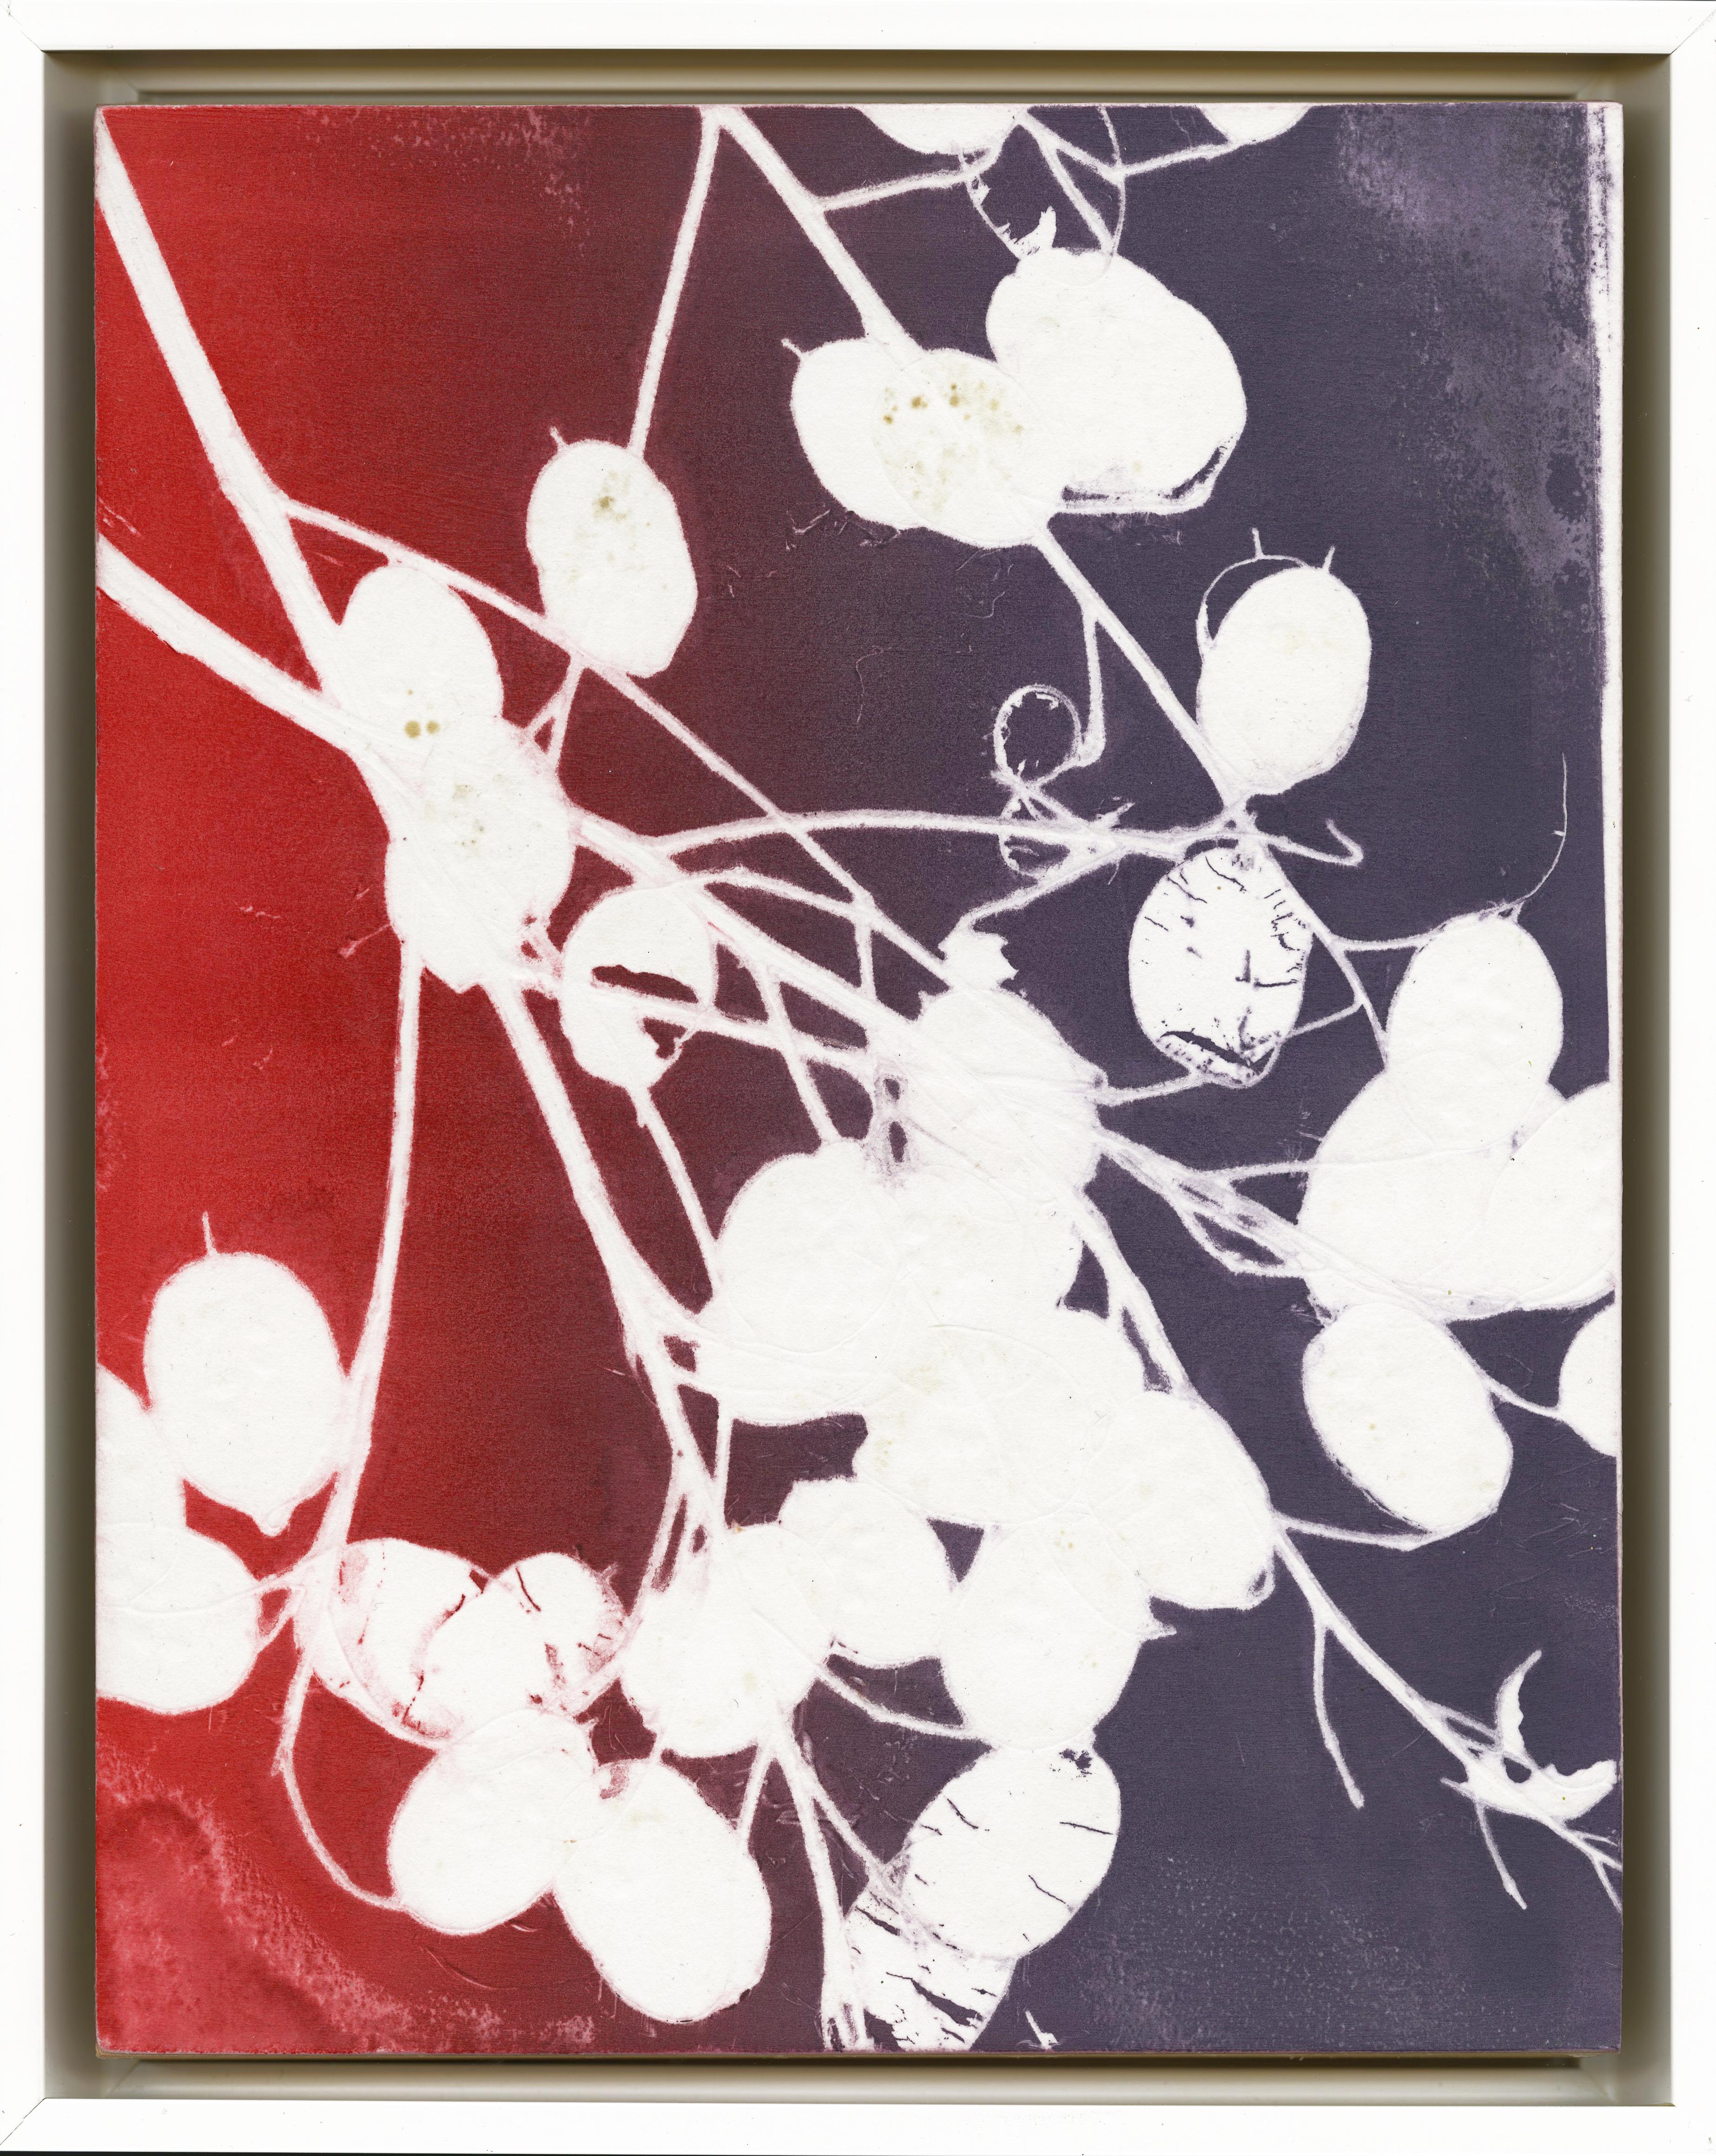 Terni 10-18/Aster Leaf, Grass and Moonwort in Violet + Scarlet - Contemporary Print by Nina Tichava